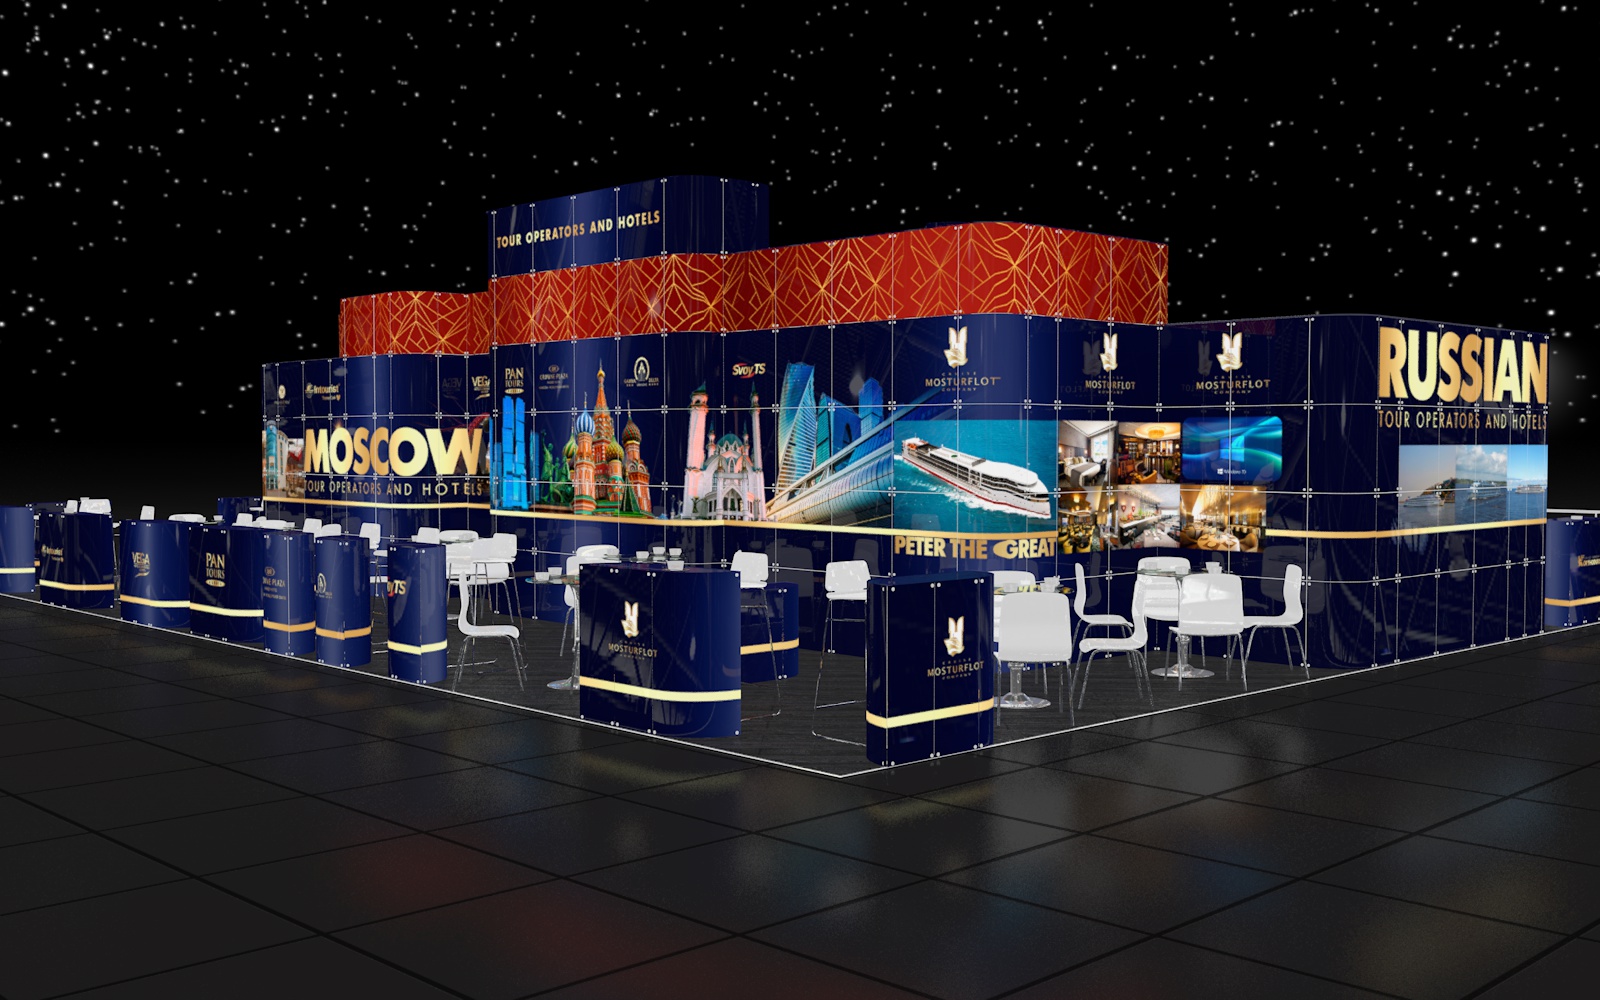 Stand construction at the exhibition ITB Berlin march 2019